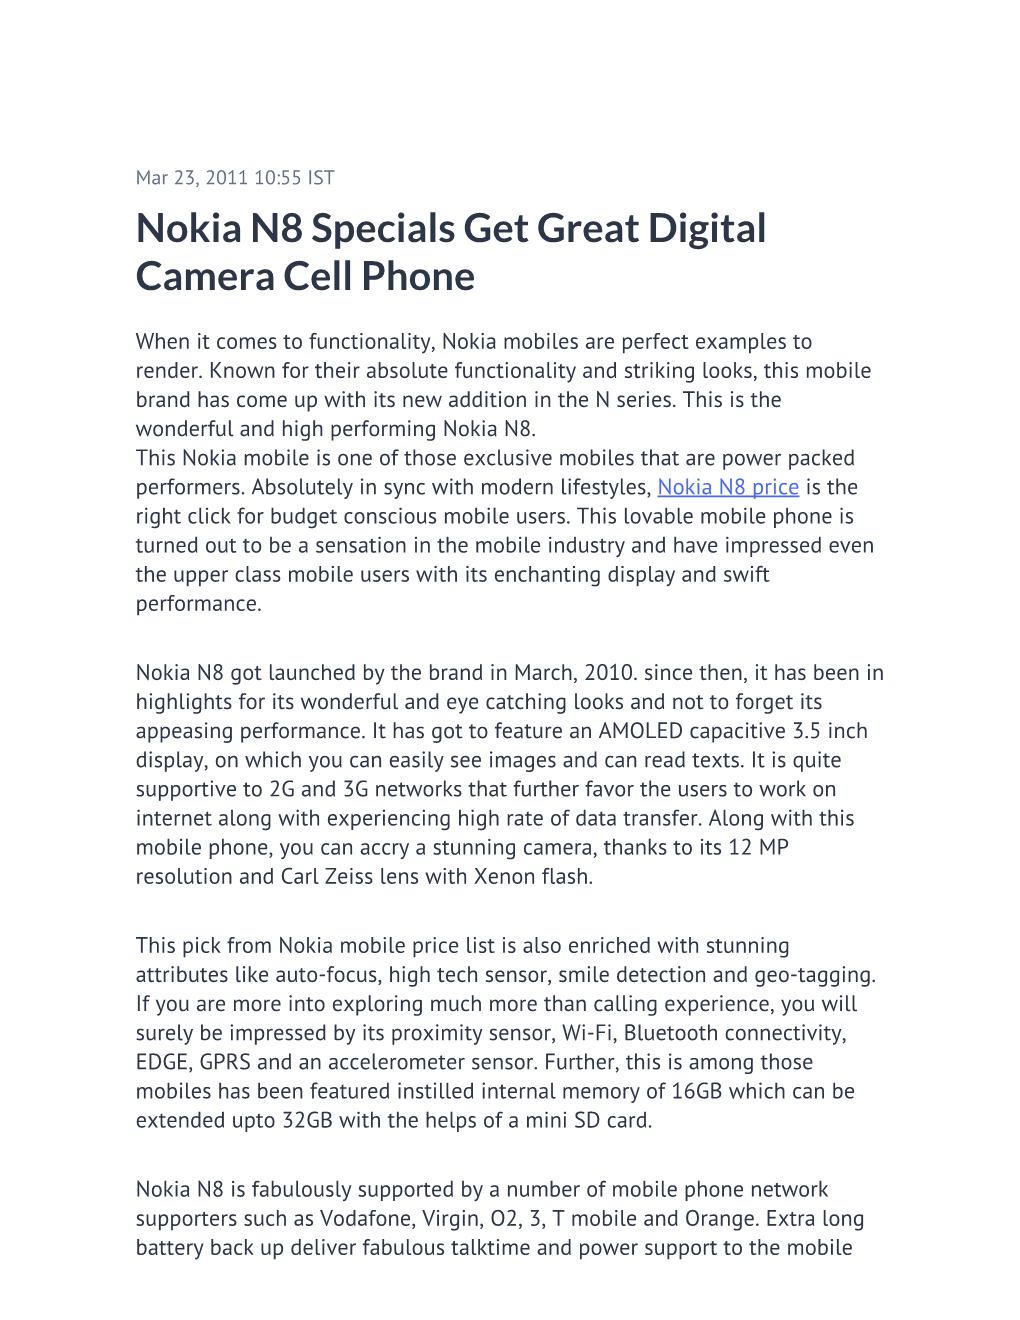 Nokia N8 Specials Get Great Digital Camera Cell Phone